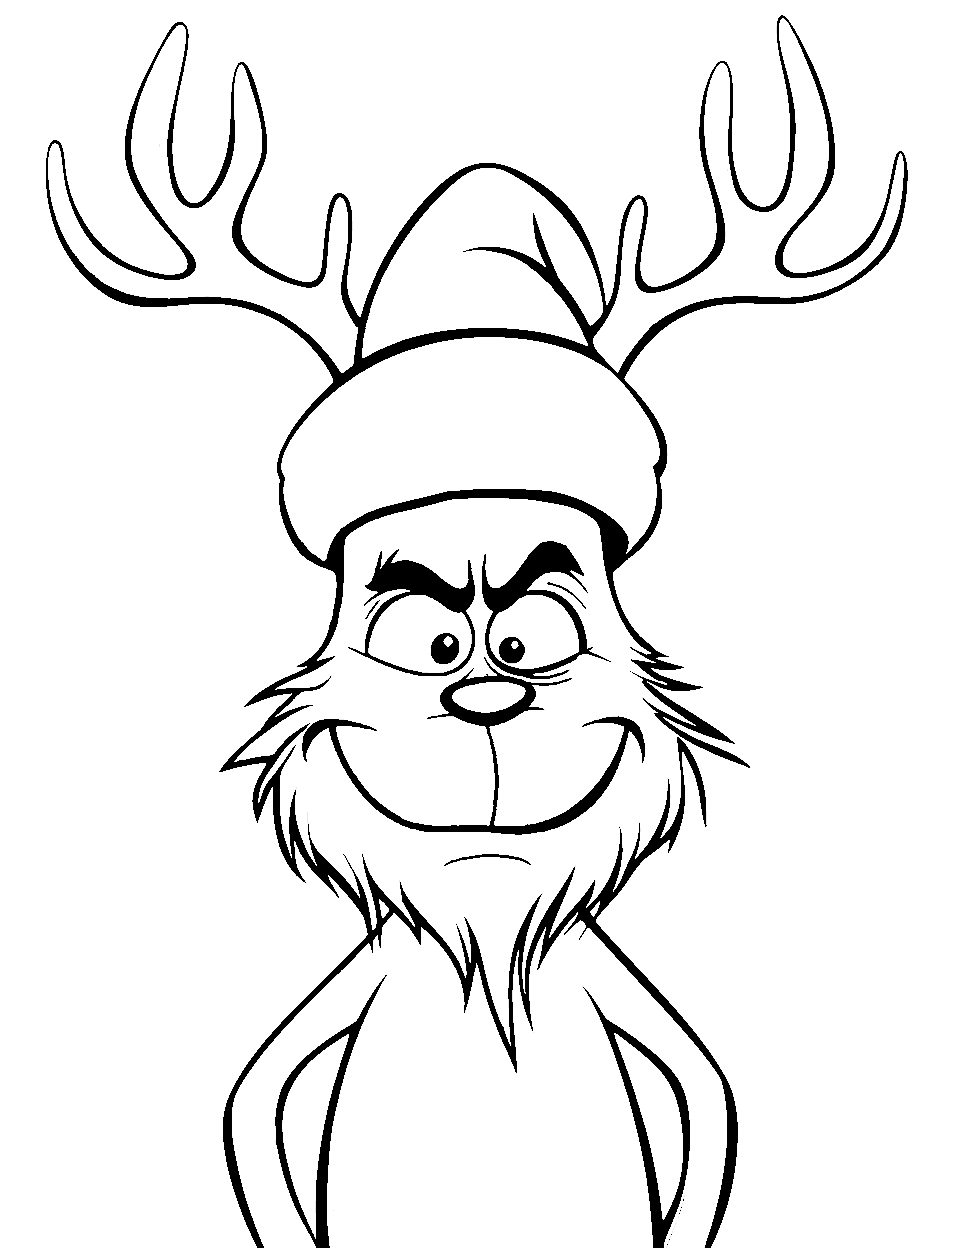 Grinch coloring pages free printable sheets